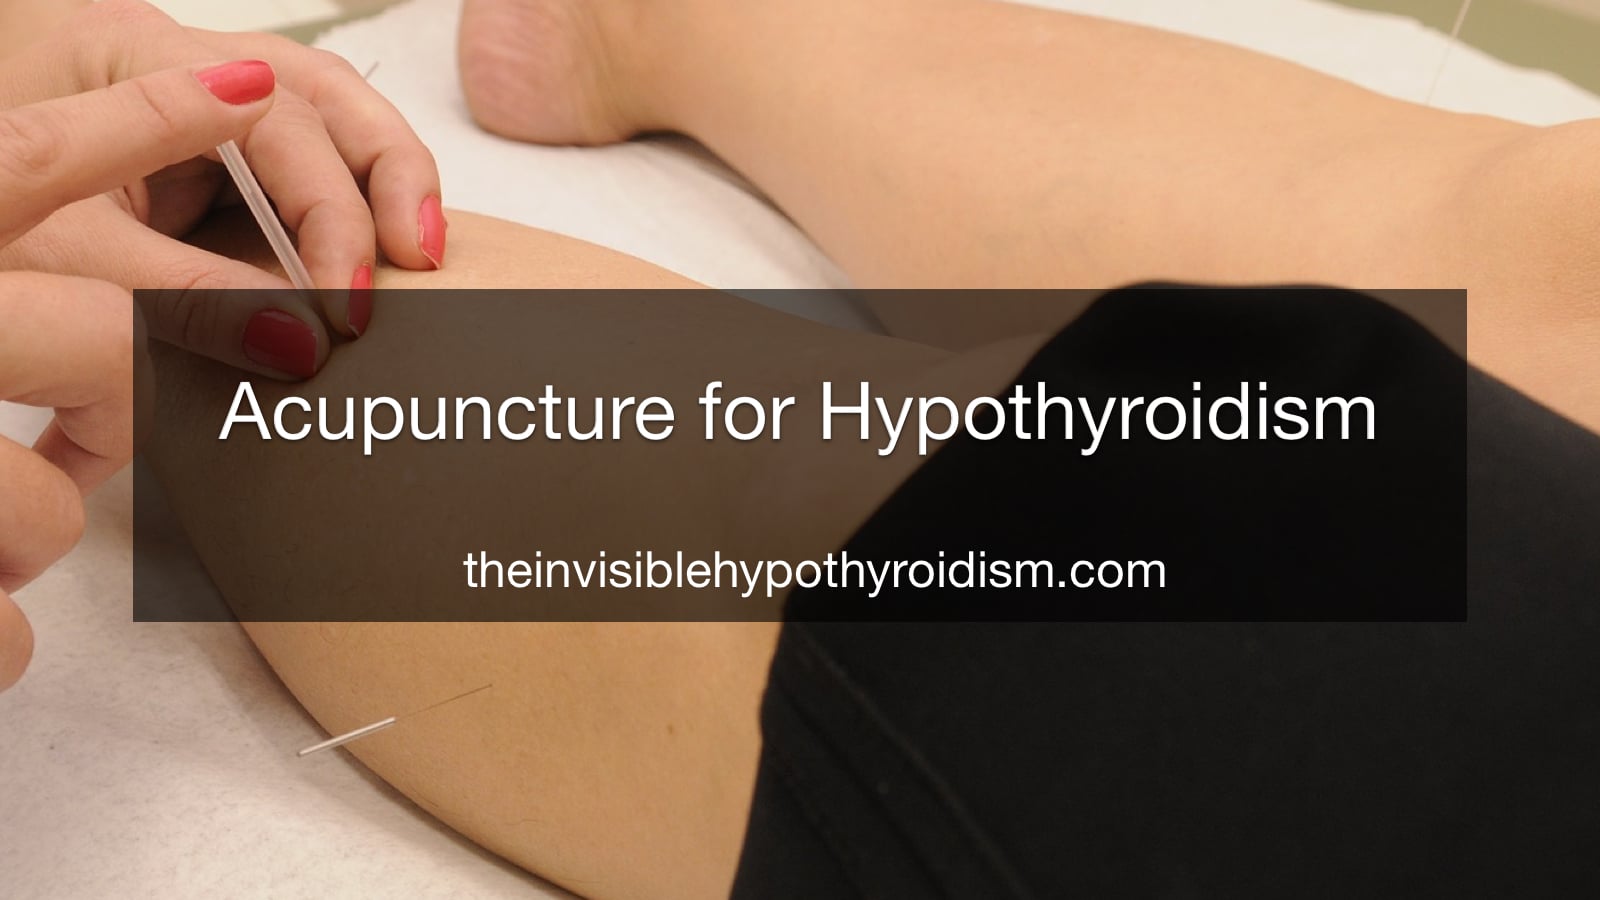 Acupuncture for Hypothyroidism